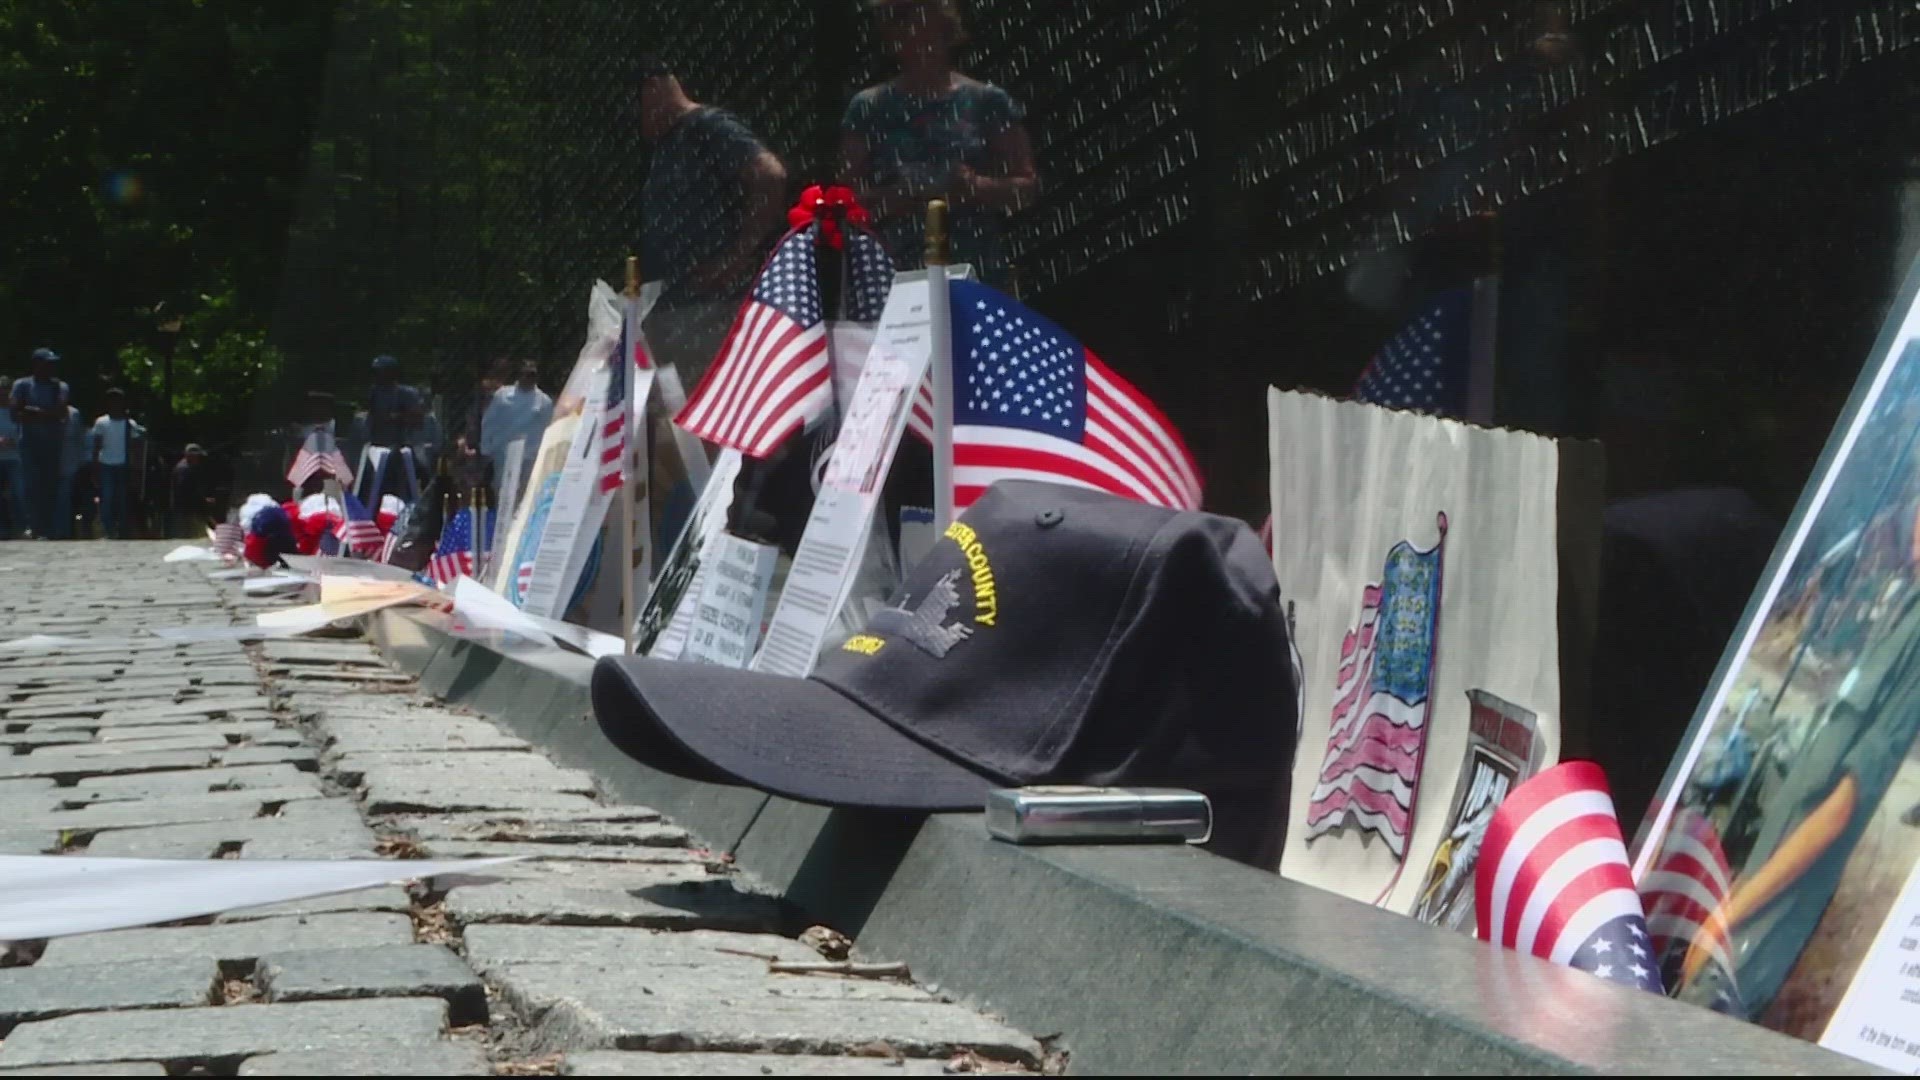 2023 marks 50 years since the end of the Vietnam War. At the National Mall, veterans shared their reflections ahead of Memorial Day.